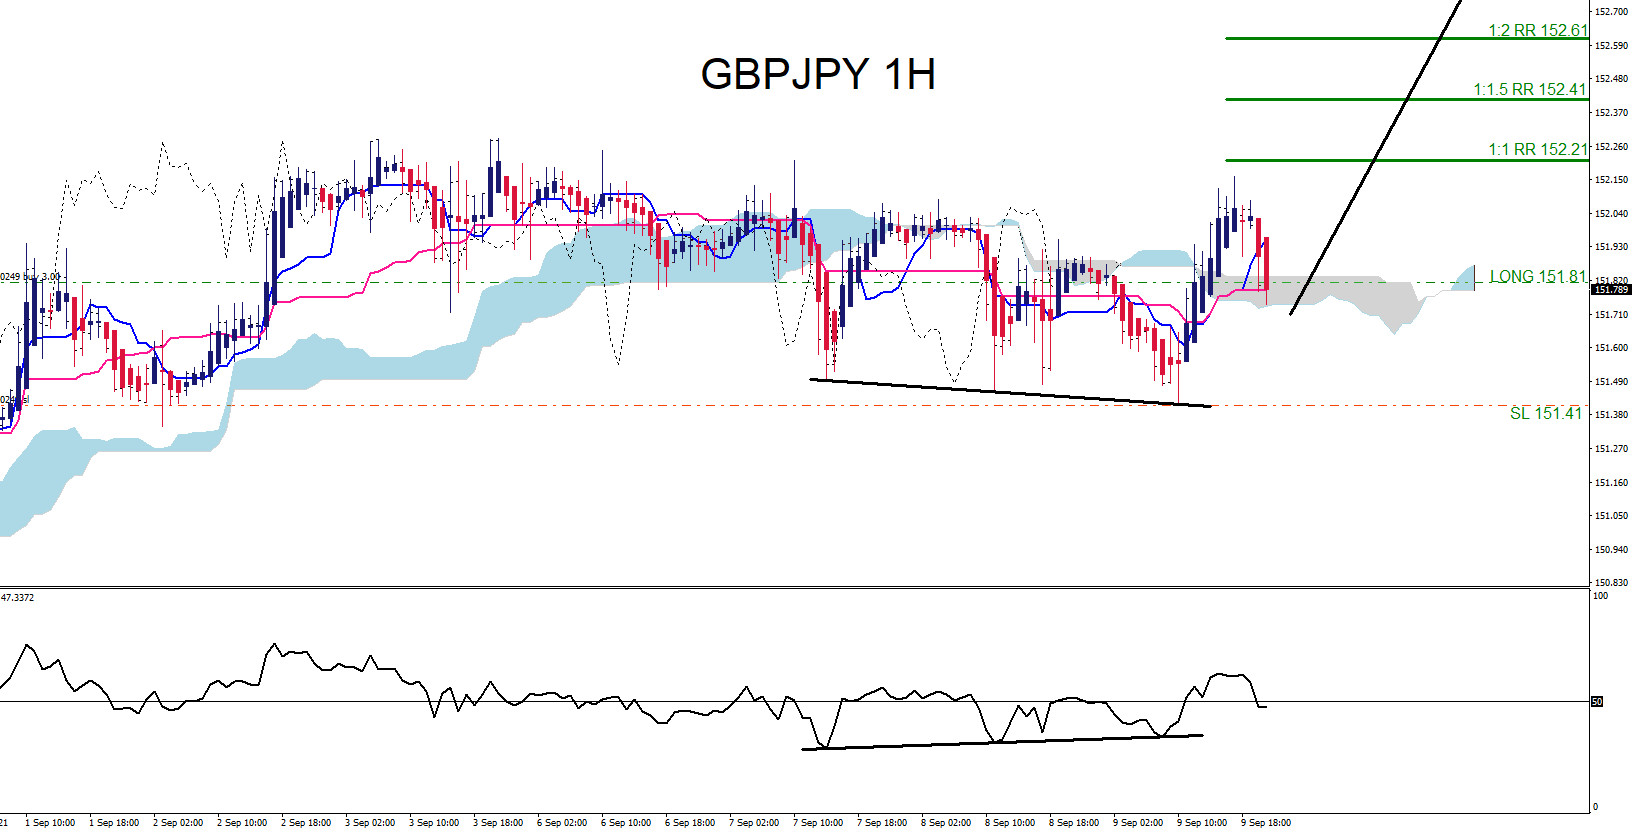 GBPJPY Moves Higher as Expected